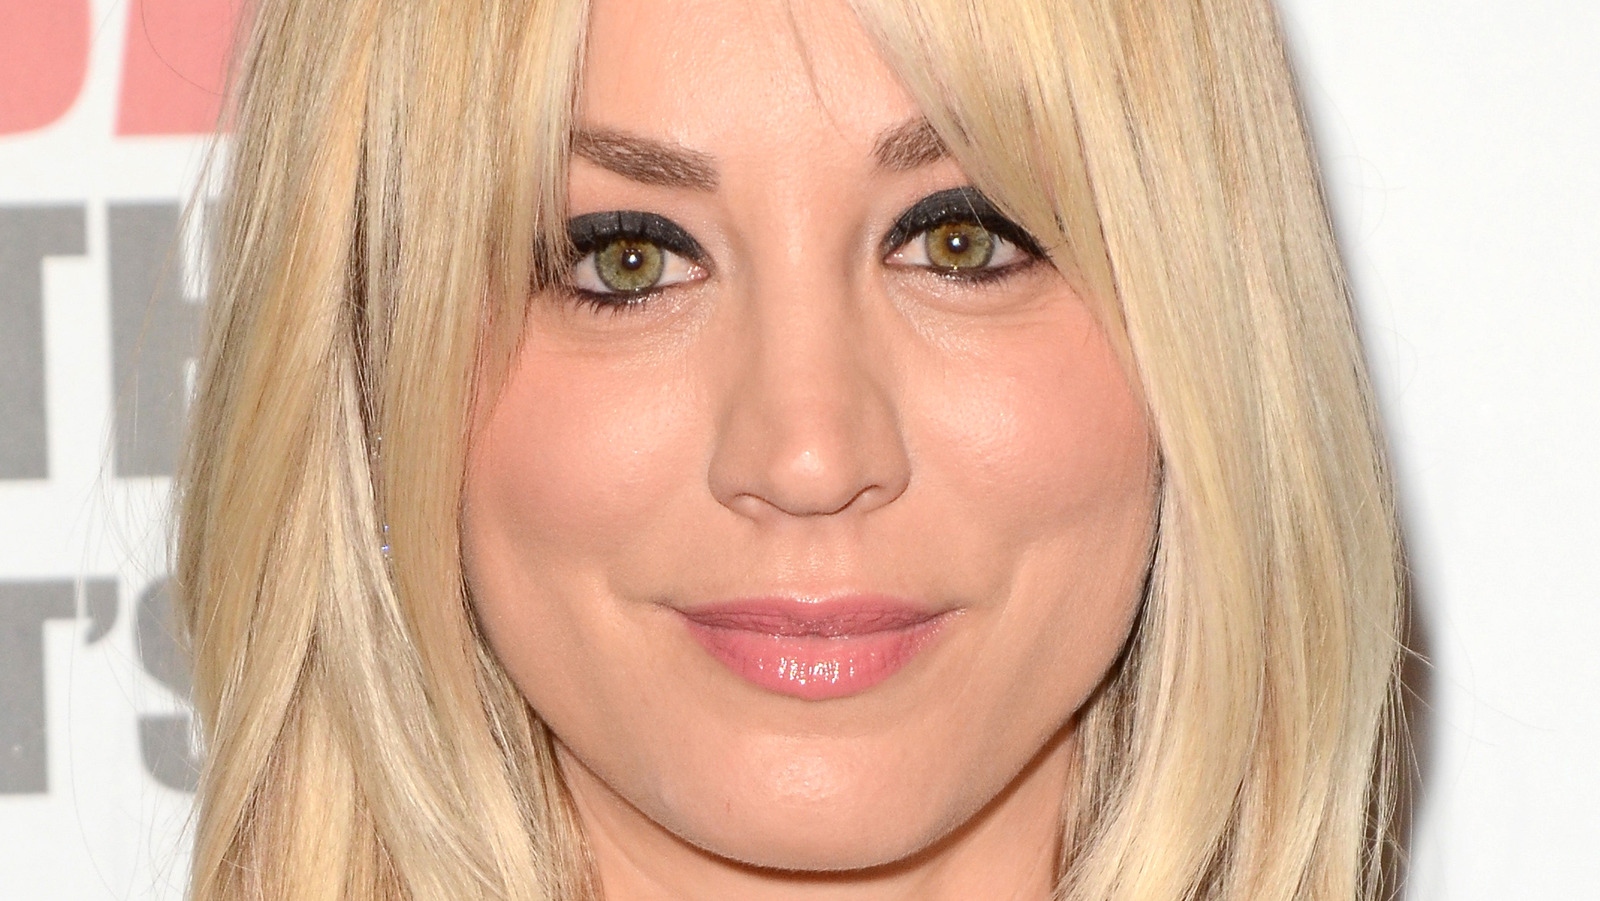 The Unexpected Age Difference Between Johnny Galecki And Kaley Cuoco